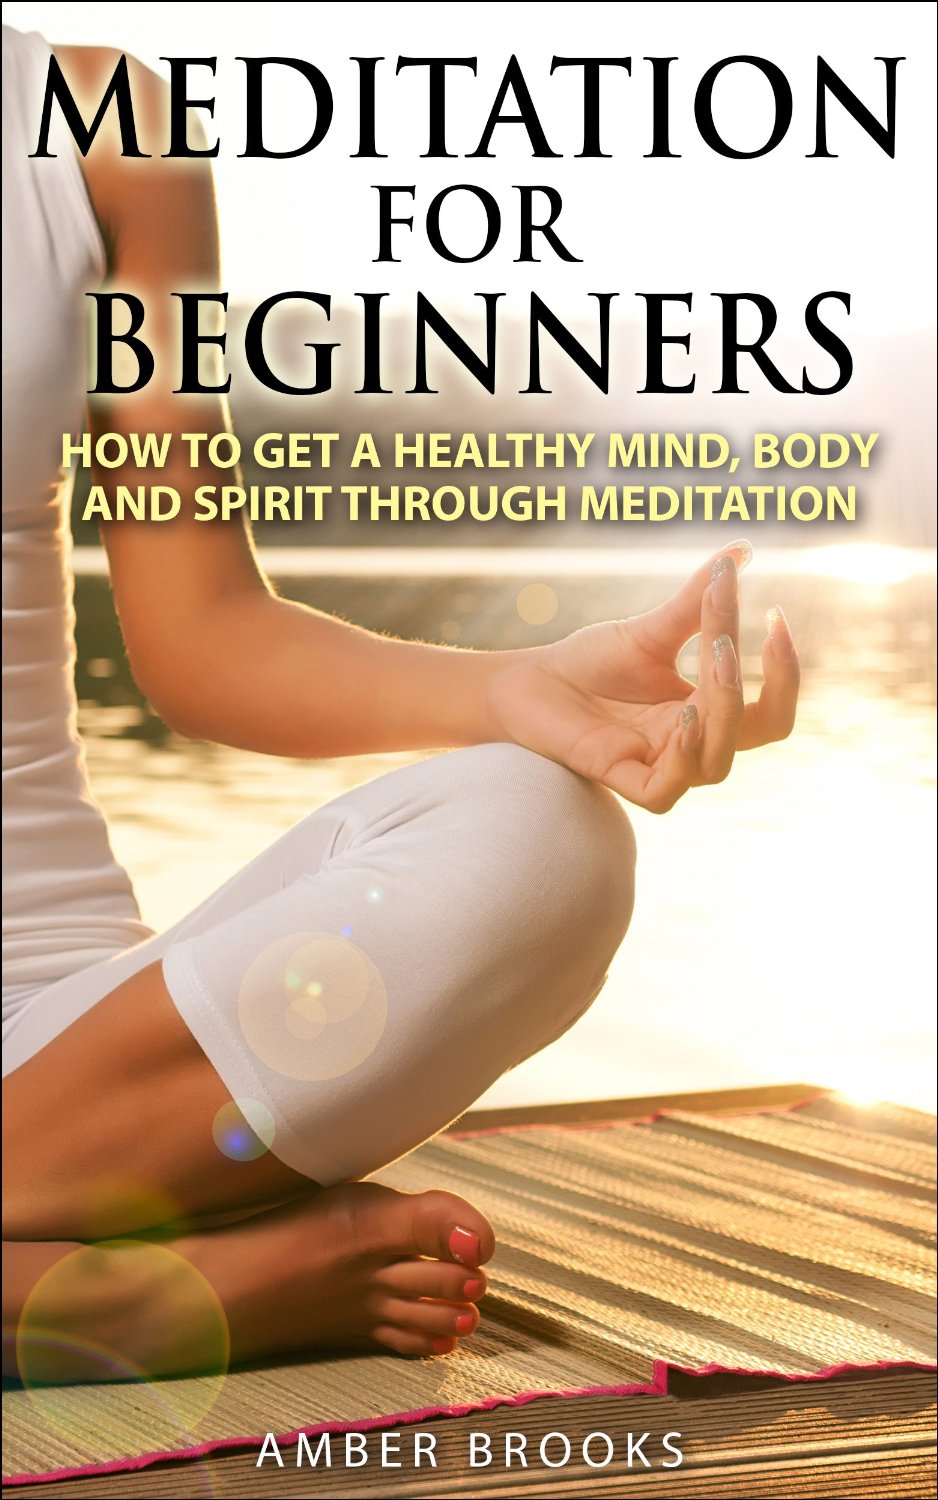 Meditation for Beginners: Learn How to get a Healthy Mind, Body, and Spirit through Meditation by Amber Brooks